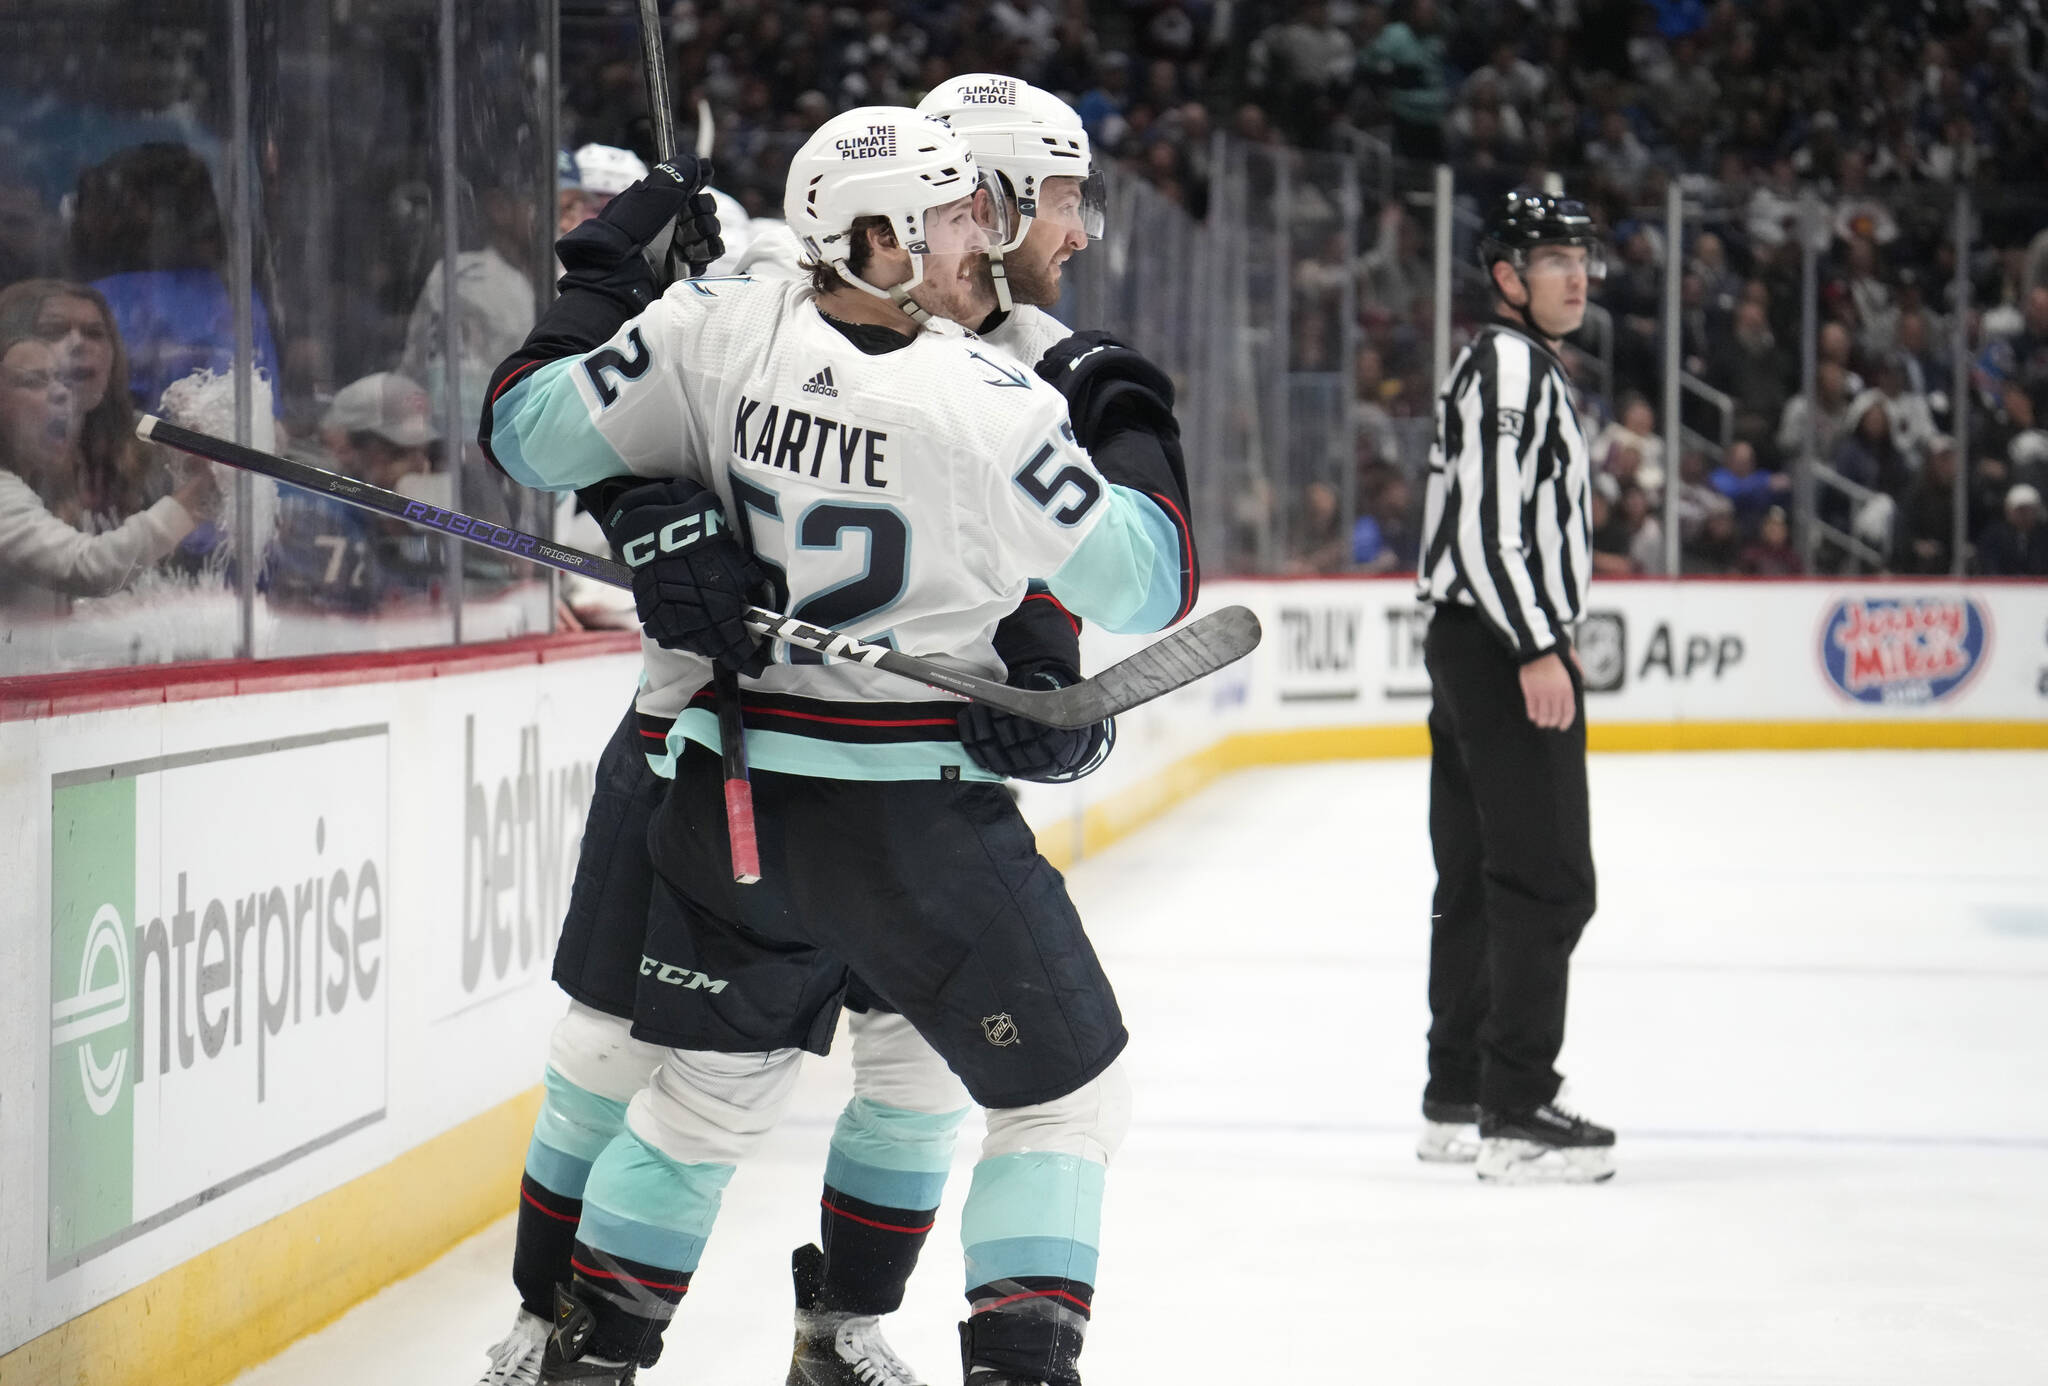 Kraken forward Tye Kartye (front) celebrates his goal with defenseman Will Borgen during the second period of Game 5 of a first-round playoff series against the Avalanche on Wednesday in Denver. (AP Photo/David Zalubowski)